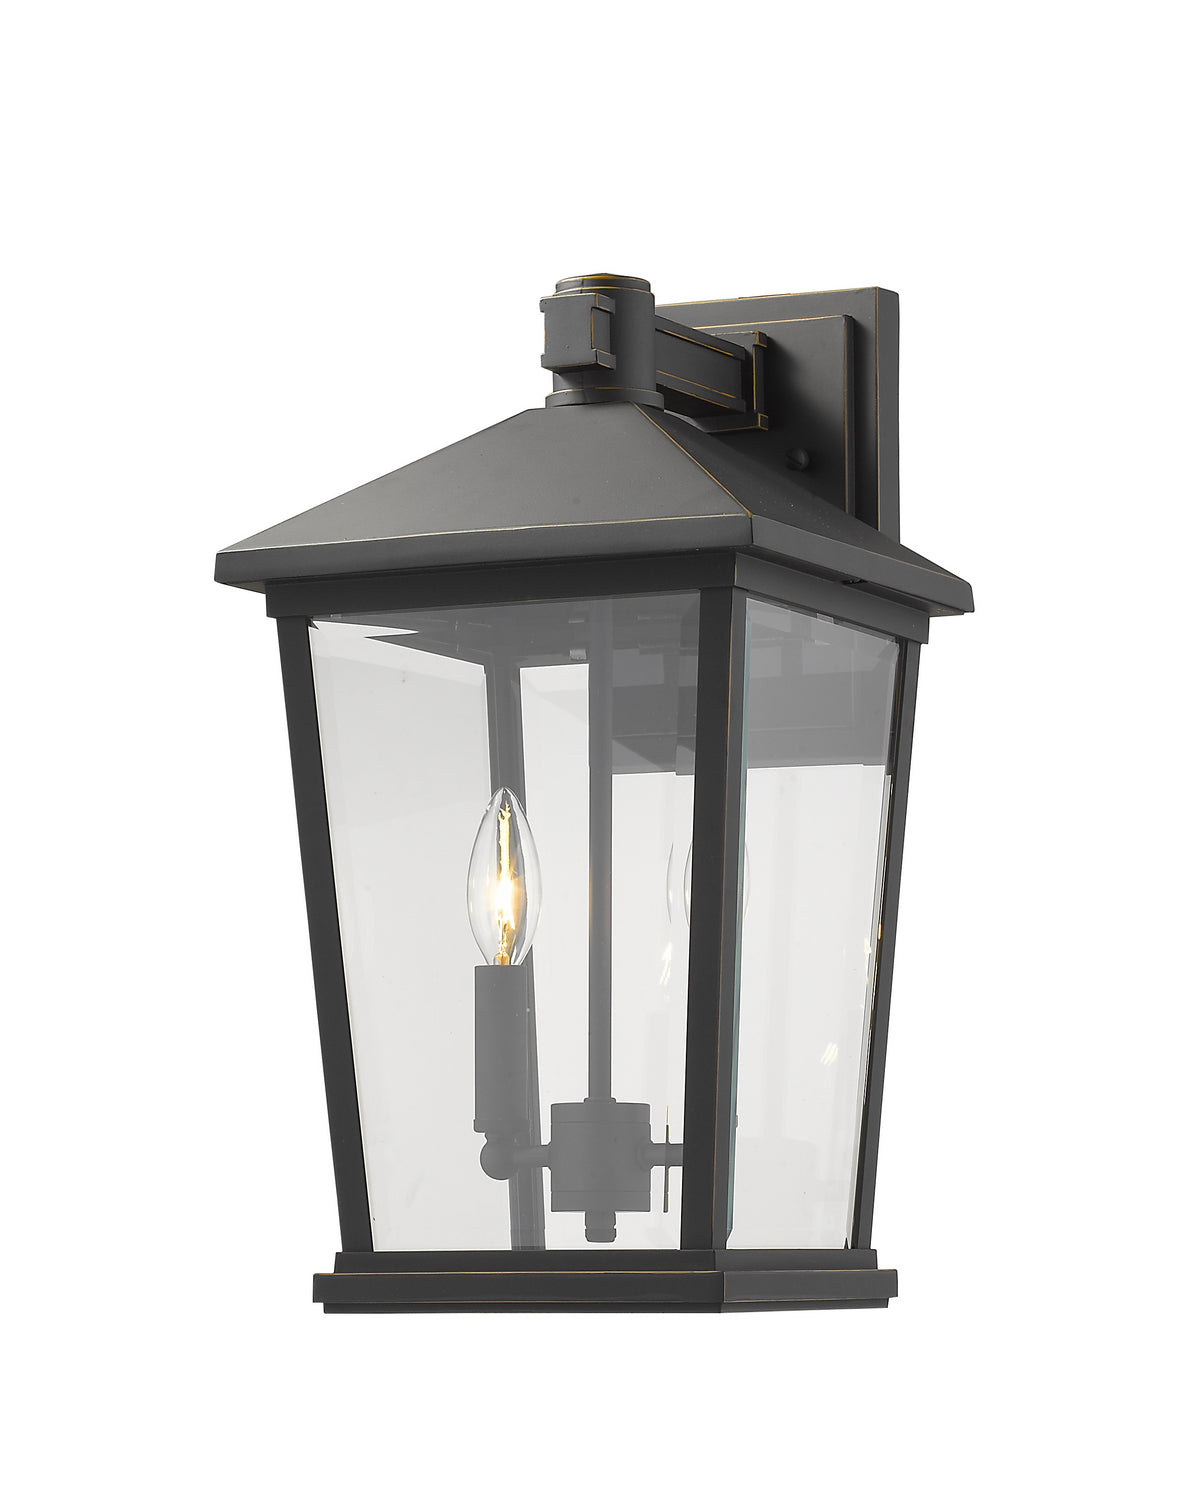 Z-Lite Canada - Two Light Outdoor Wall Sconce - Beacon - Oil Rubbed Bronze- Union Lighting Luminaires Decor